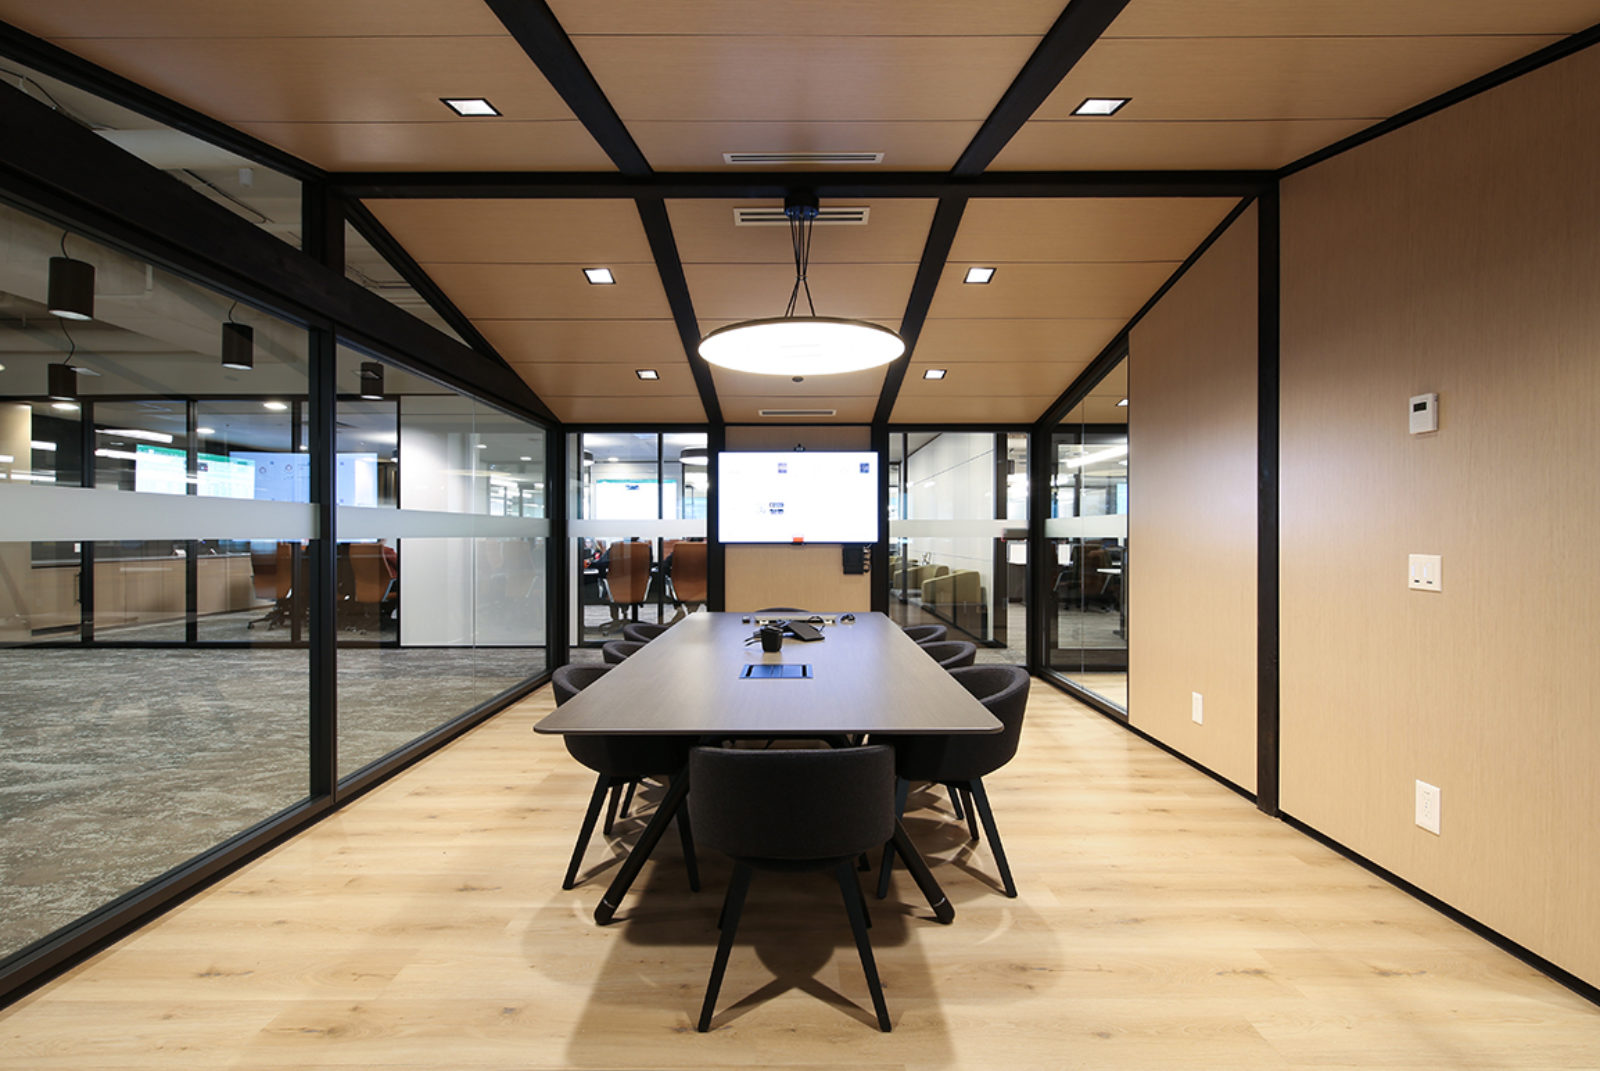 Inside of a DIRTT modular room. Conference setting with light hard floors, black beams, wooden panels and glass. Table and chairs are in the center.